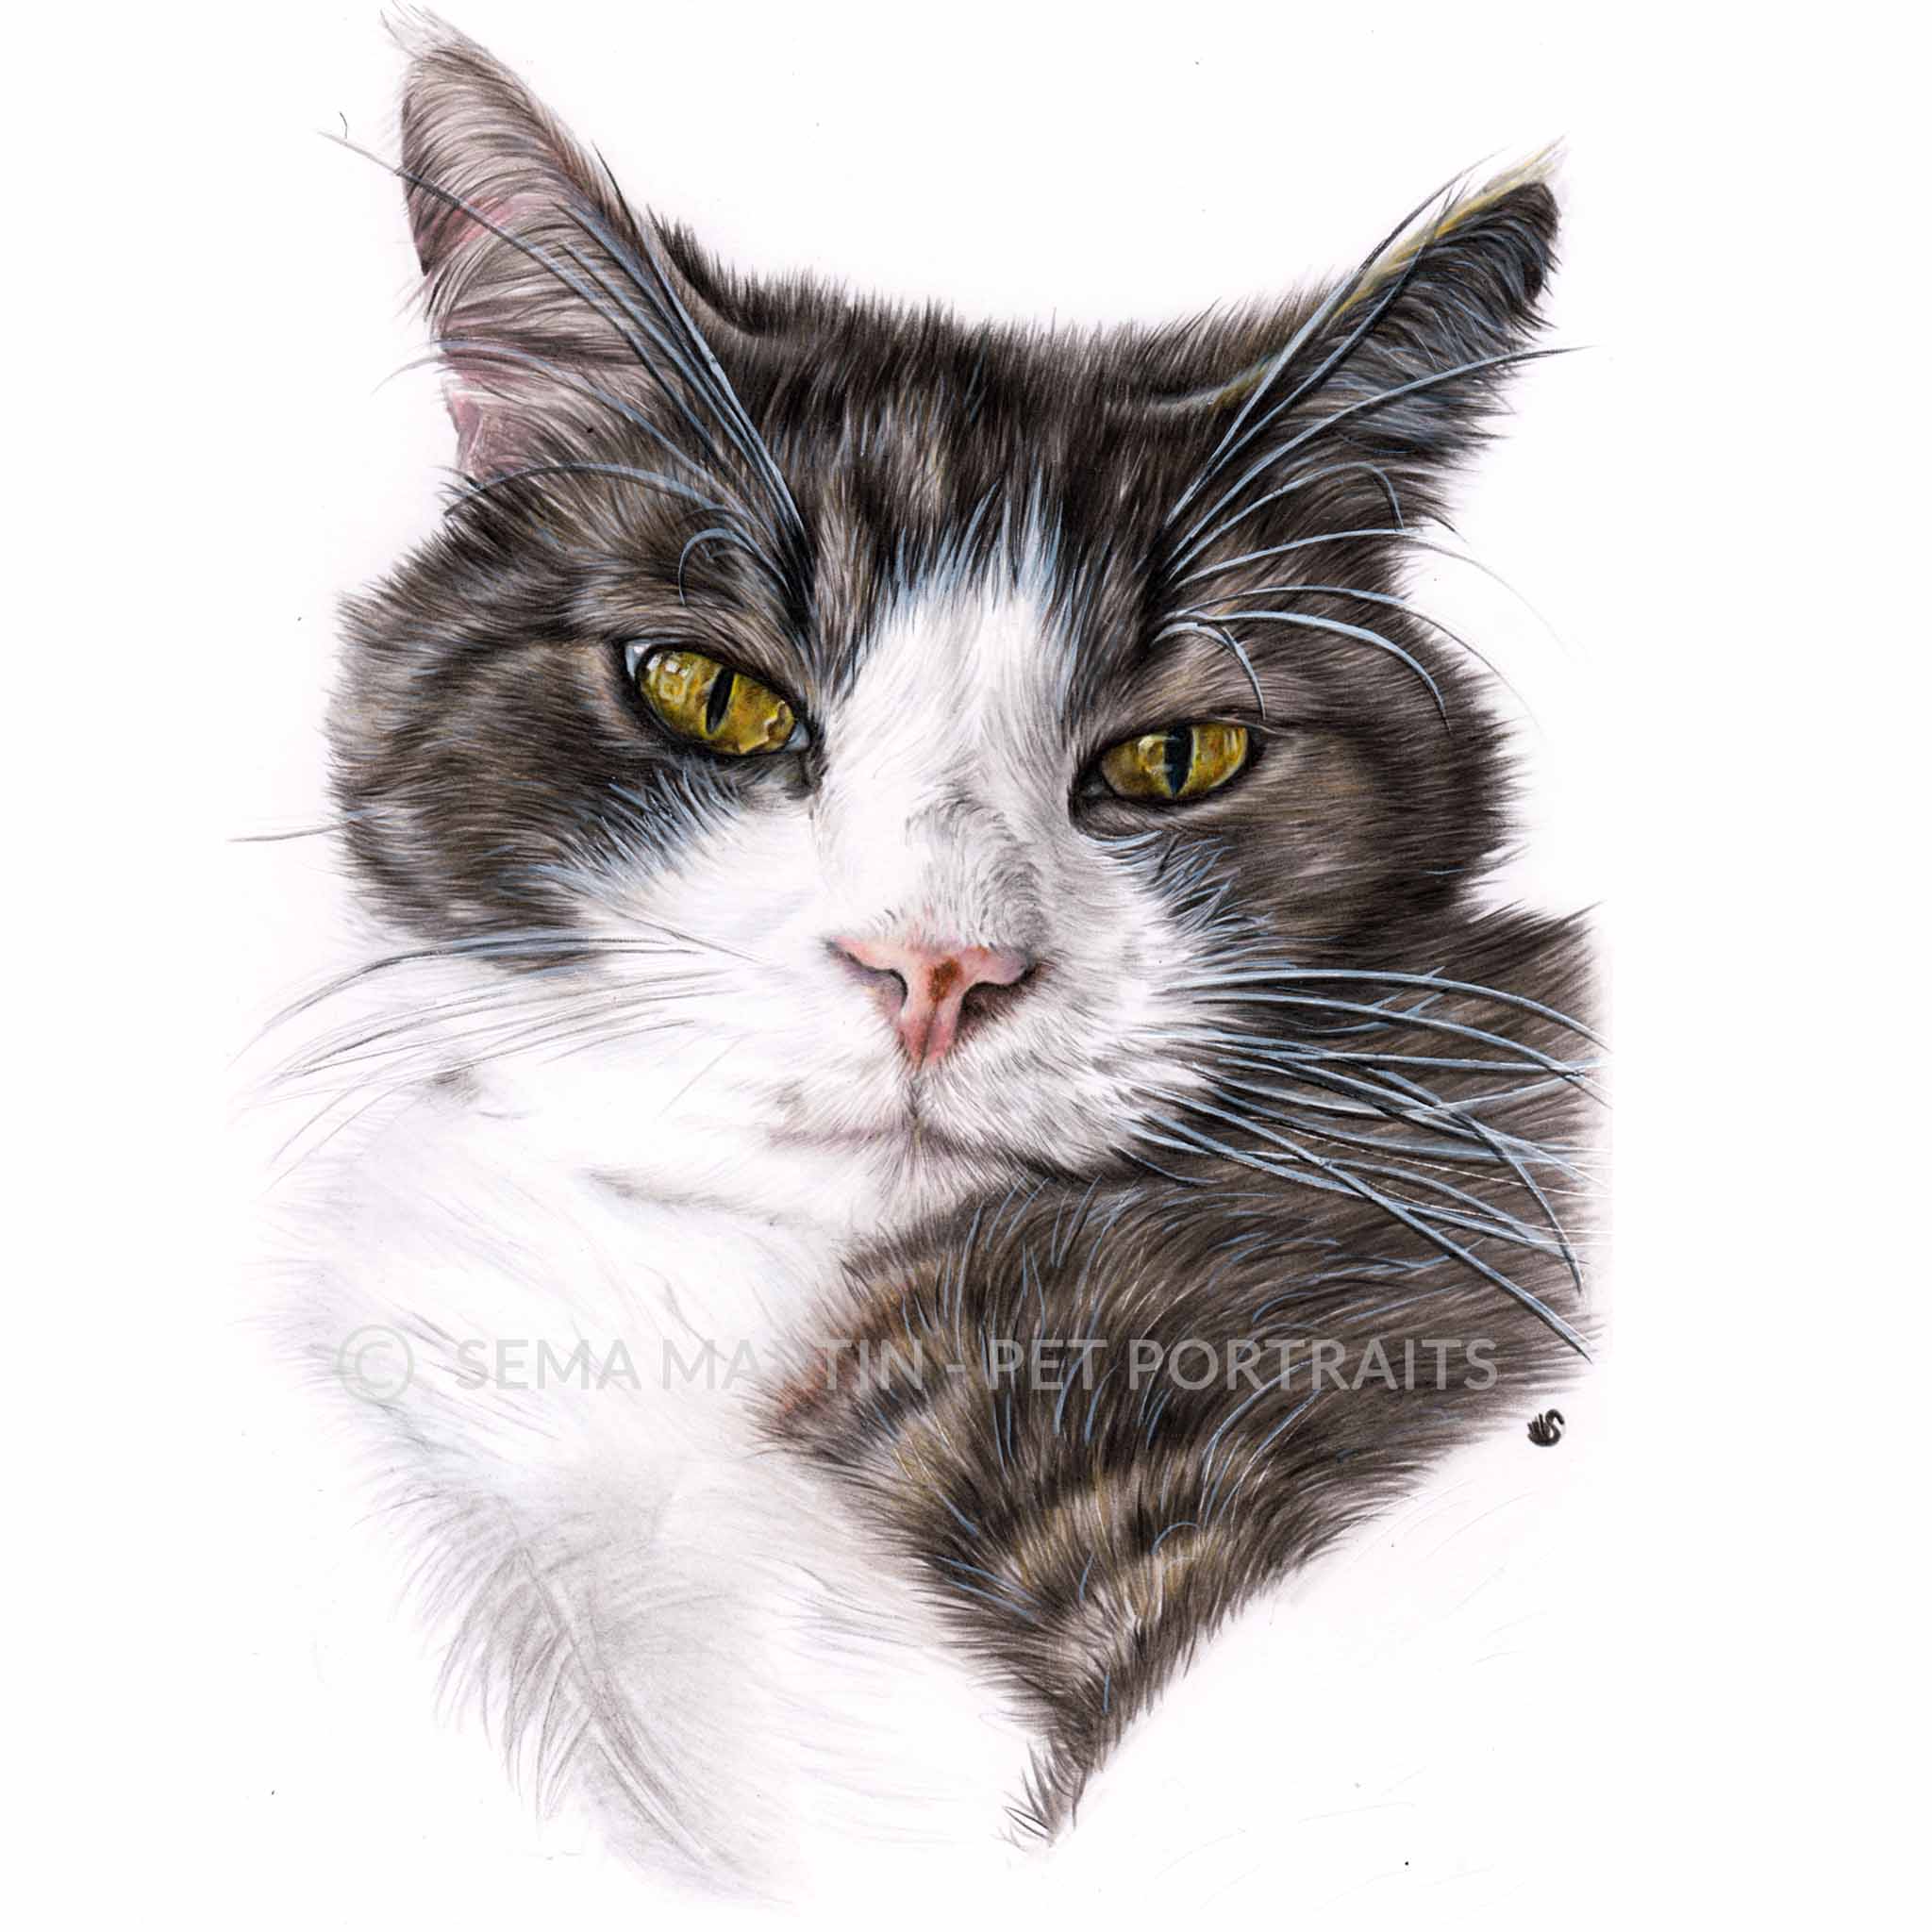 Drawing of Ollie the tabby cat mix with yellow eyes from Victoria, Australia (Copy)